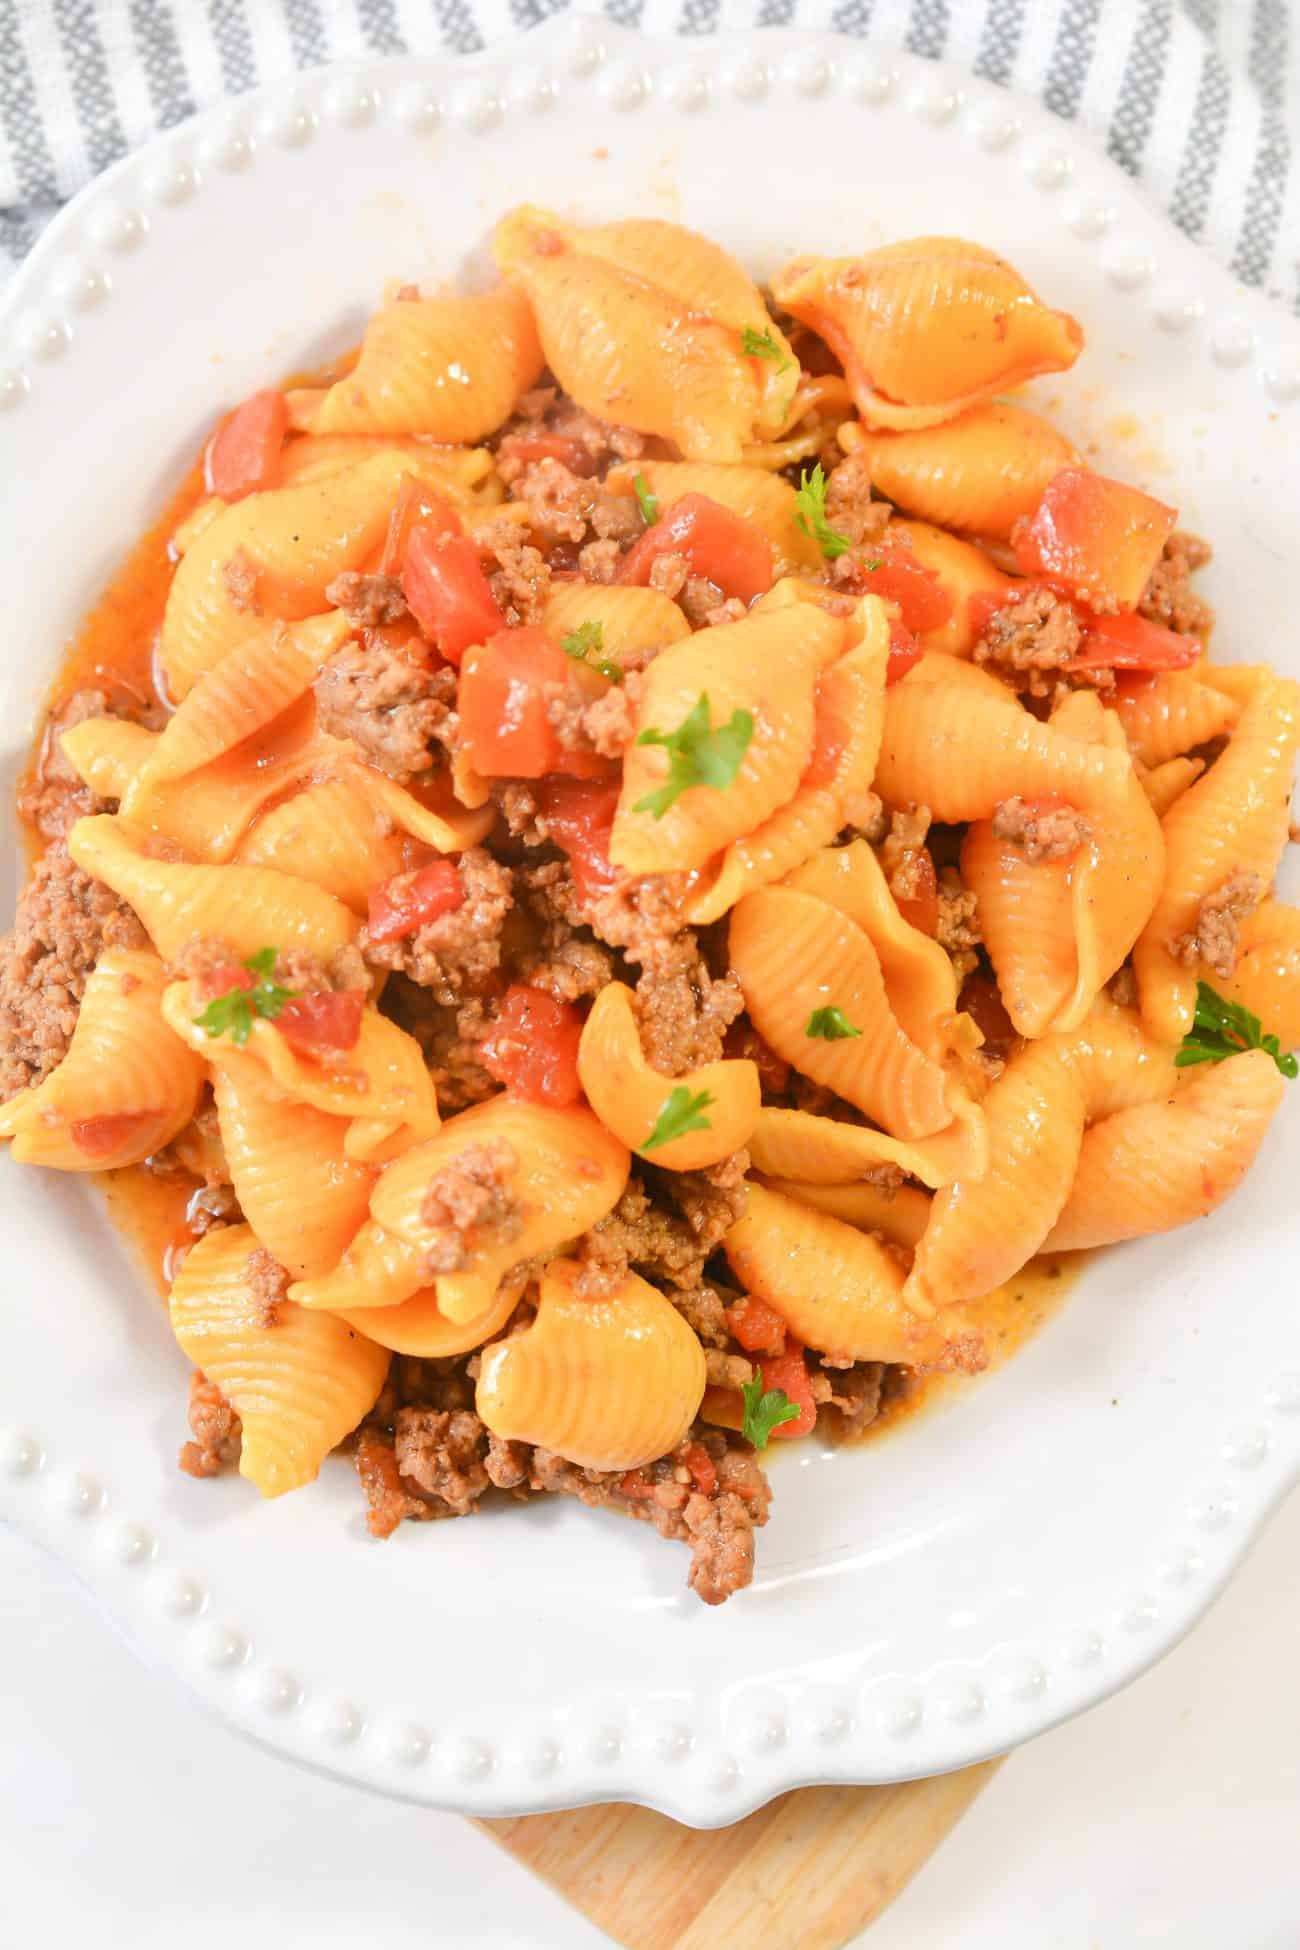 pasta recipes with ground beef, stuffed shells with ground beef, ground beef stuffed shells